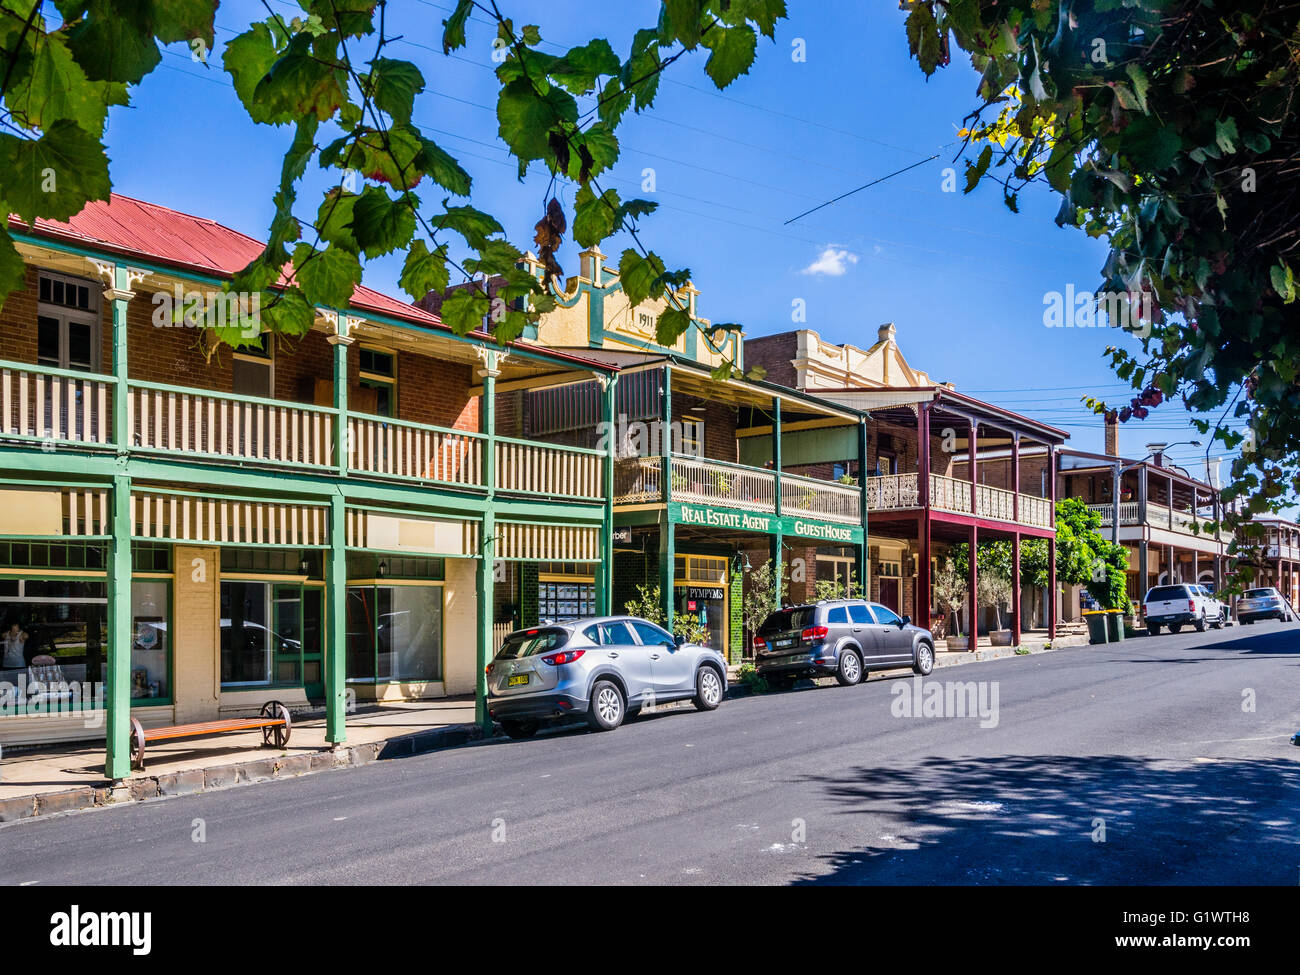 Australia, New South Wales, Central West region, ascending march of verandas at Pym Street, histric town of Millthorpe Stock Photo